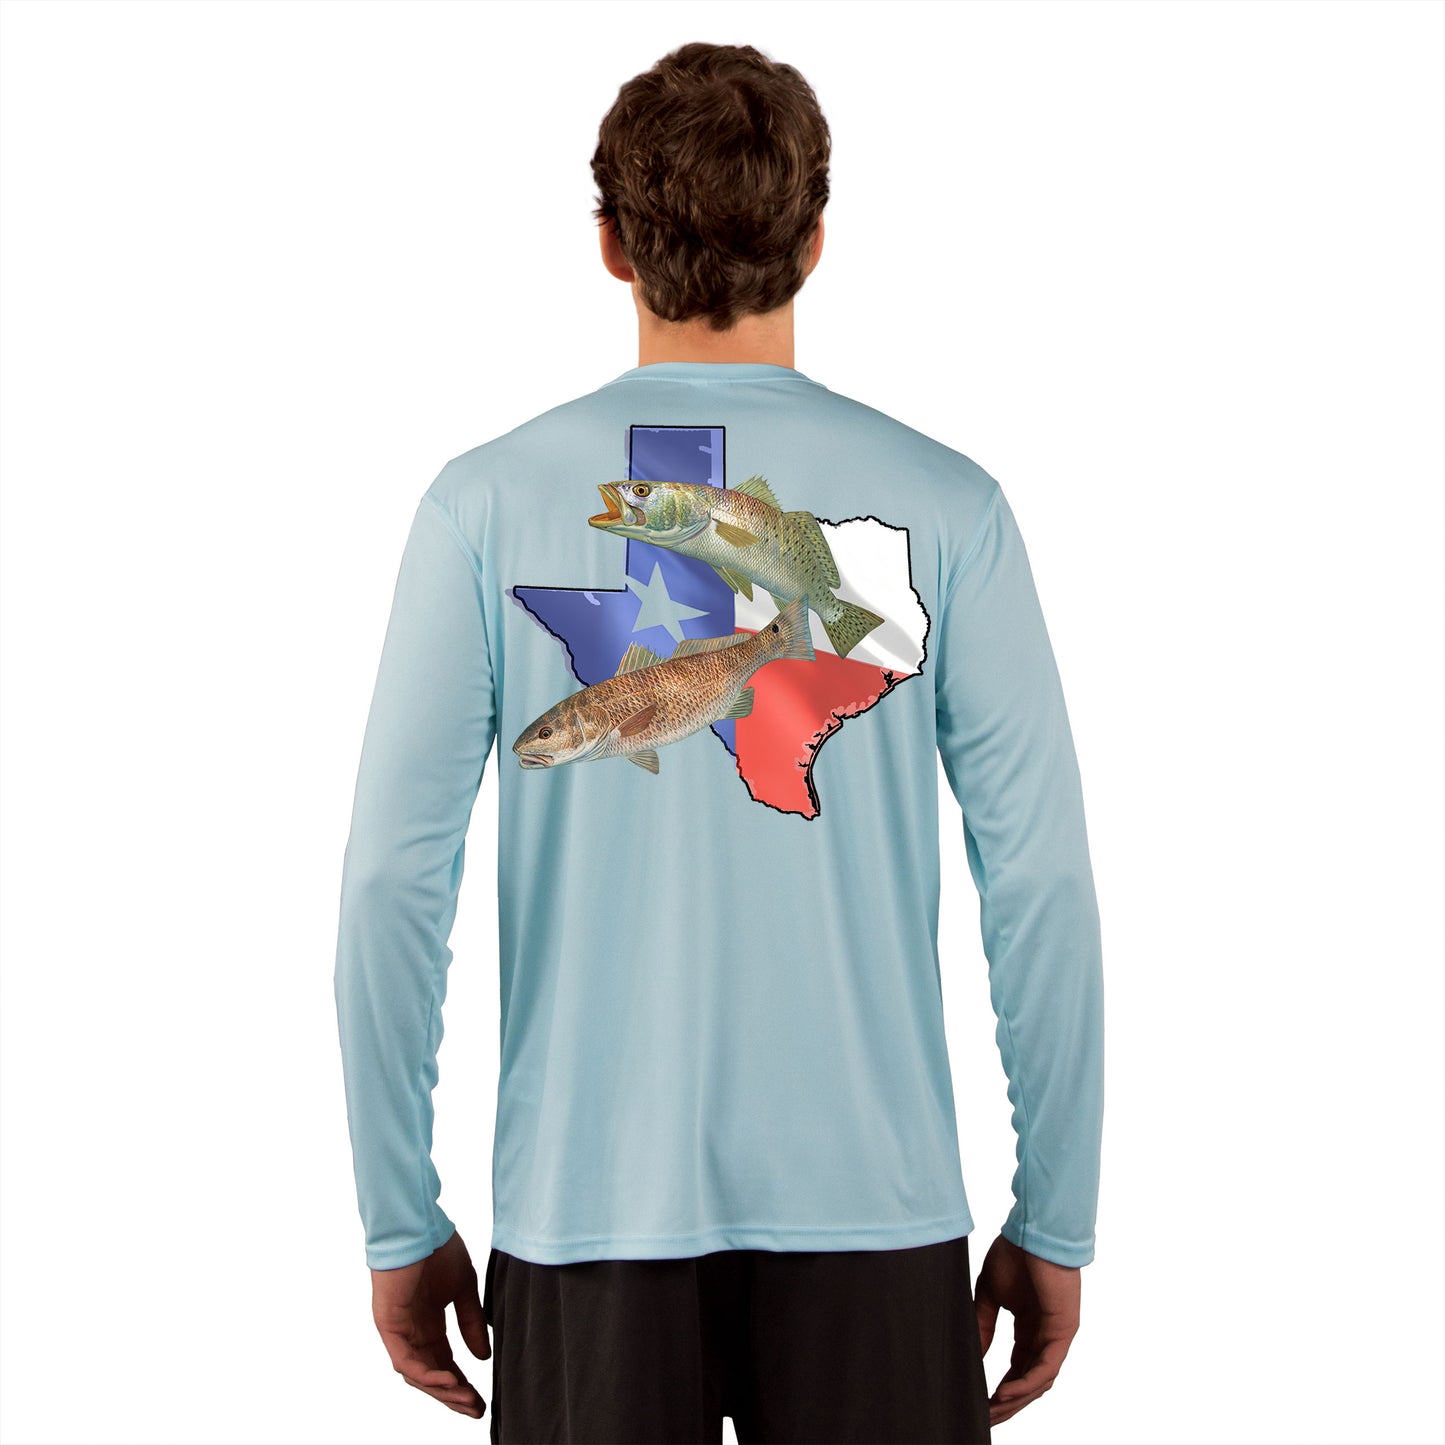 [NEW ARTWORK] Fishing Shirt Redfish Speckled Trout Texas State Flag with Texas Flag Sleeve - Skiff Life